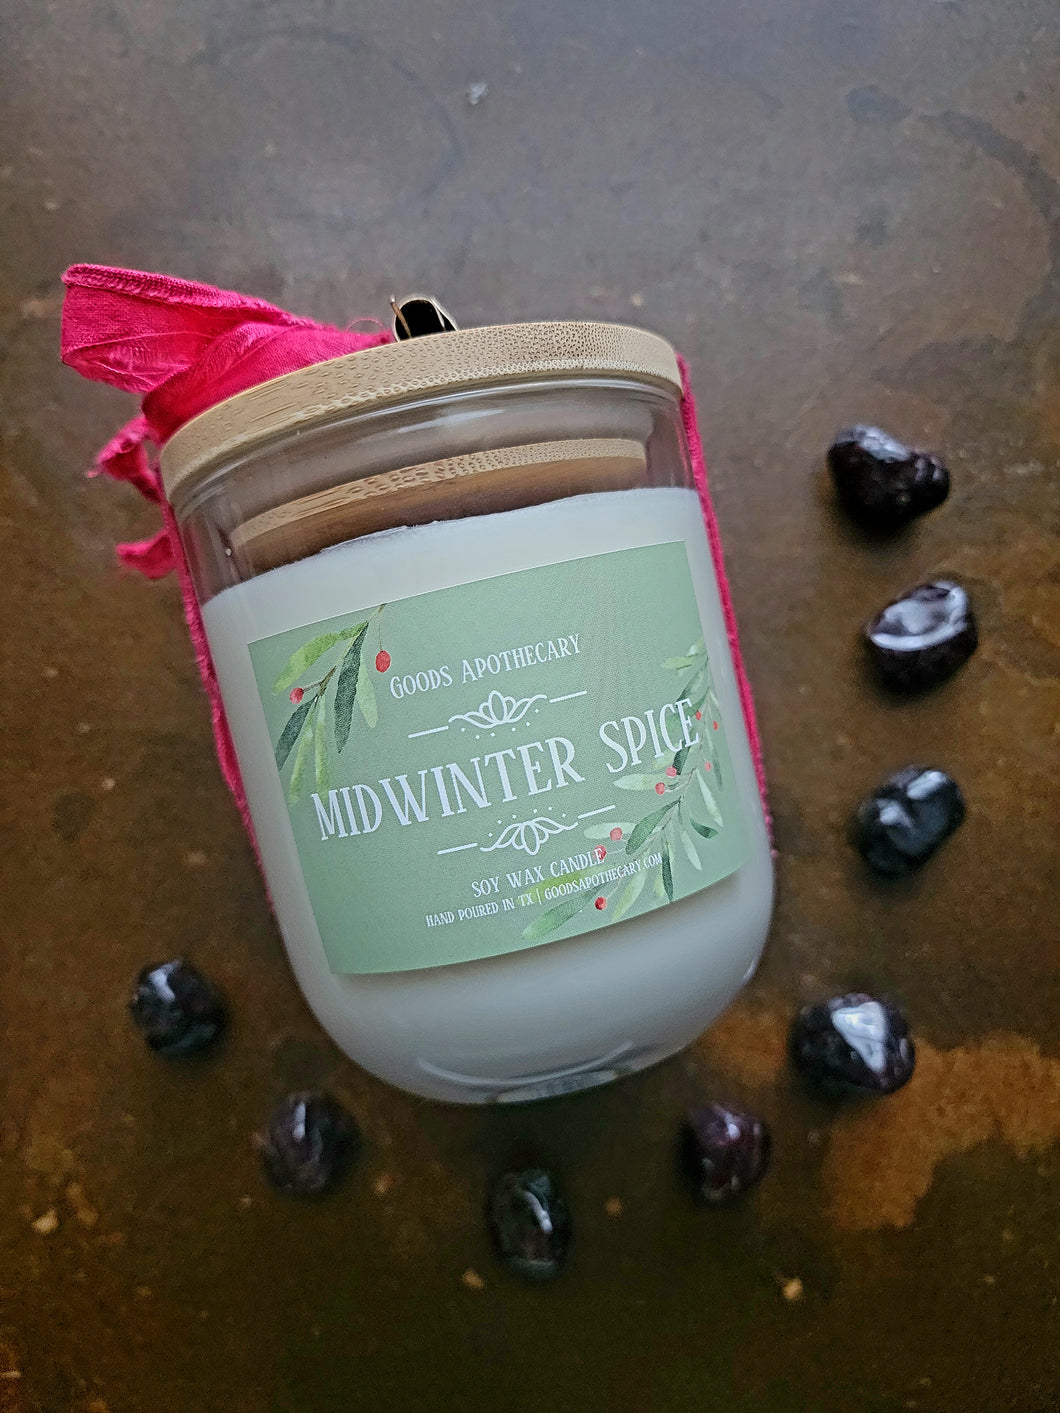 Midwinter Spice Soy Wax Candle